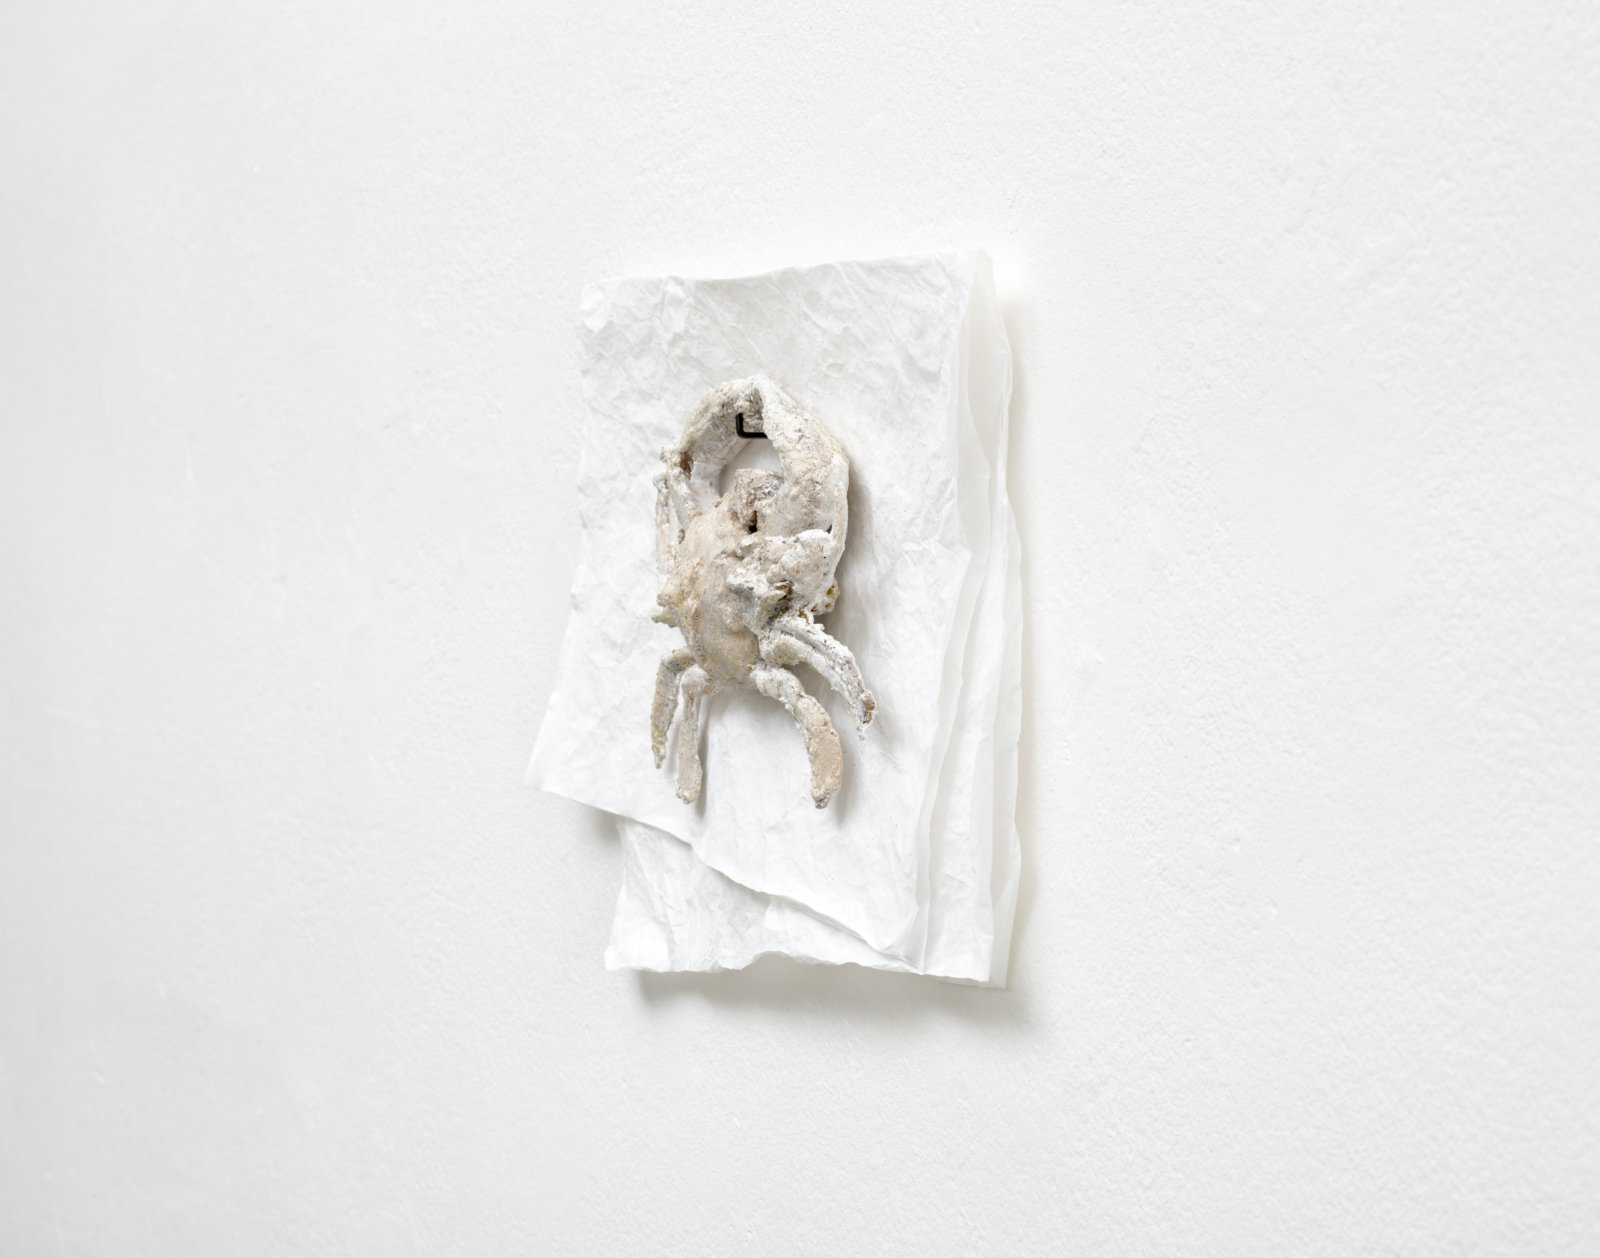 Rochelle Goldberg, Tiny protective universe, 2022, plastic crab, tissue paper, acrylic paint, gesso, dirt, concrete, polyester glitter, 11 x 15 in. (28 x 39 cm). Installation view, Fiction or Fictions, Christian Anderson, Copenhagen, Denmark